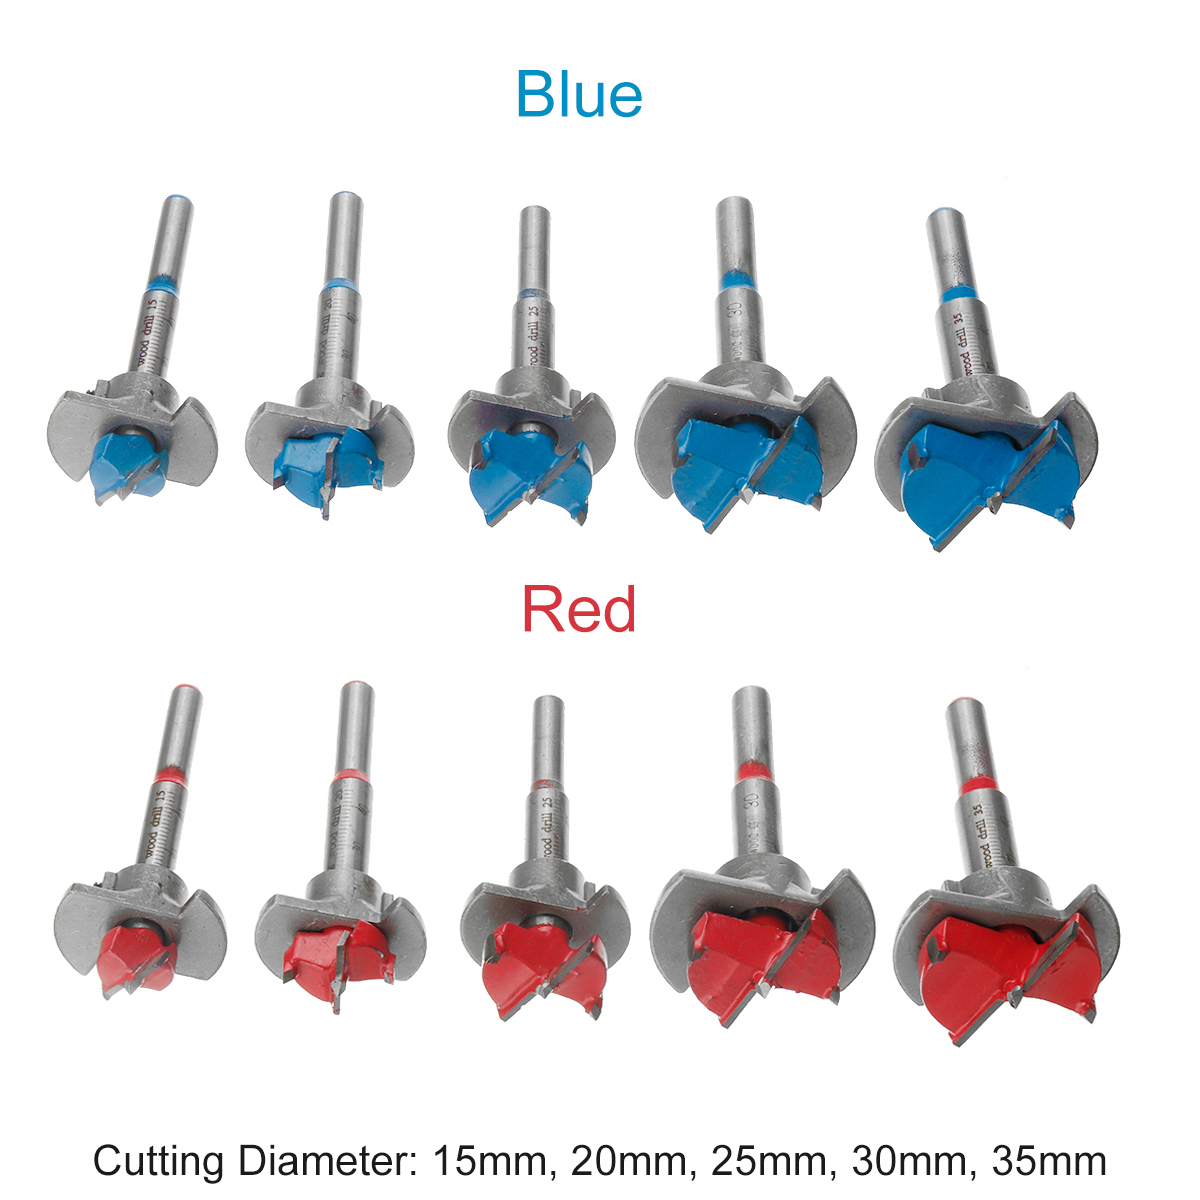 7pcs-Blue-or-Red-Woodworking-Hinge-Hole-Opener-Set-Positioning-Hole-Saw-Cutter-Drill-Bits-1615475-1